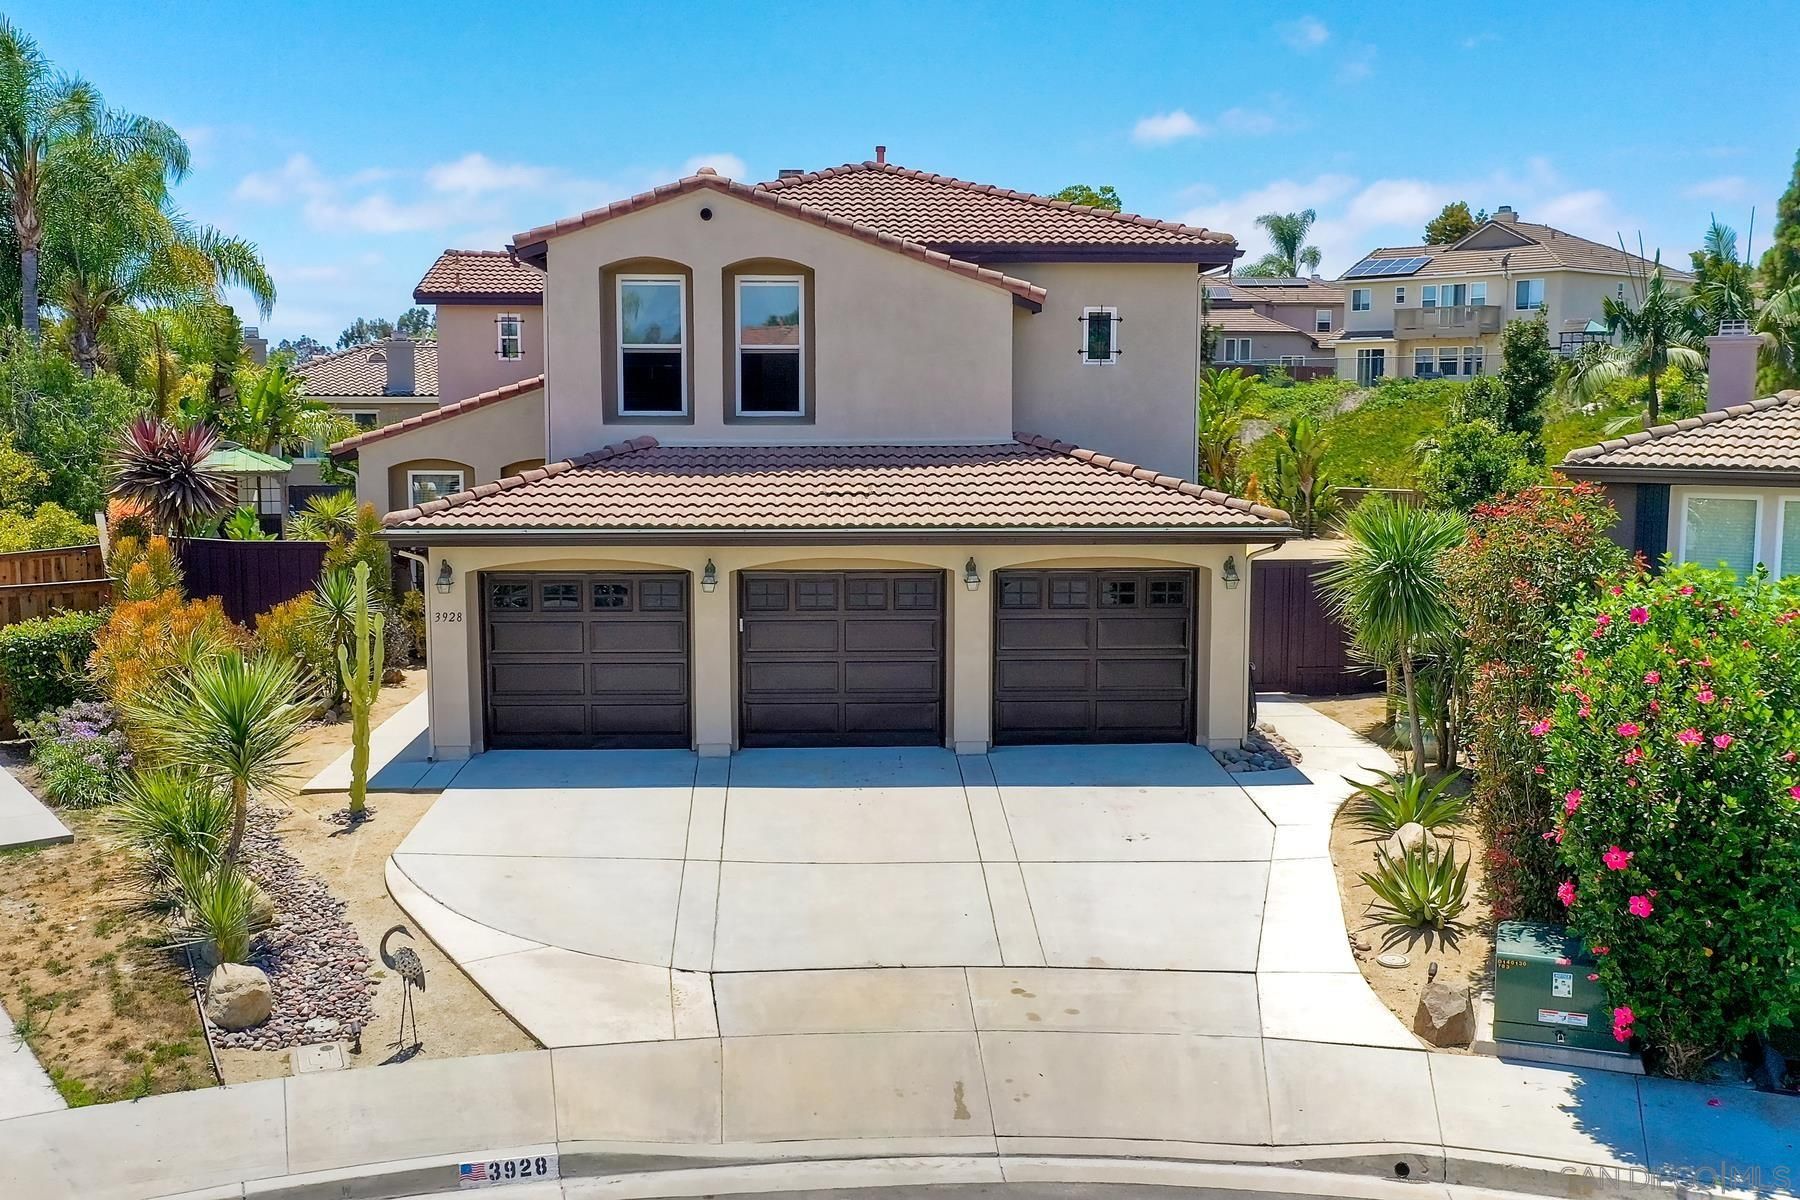 Main Photo: CARLSBAD EAST House for sale : 5 bedrooms : 3928 Plateau Pl in Carlsbad